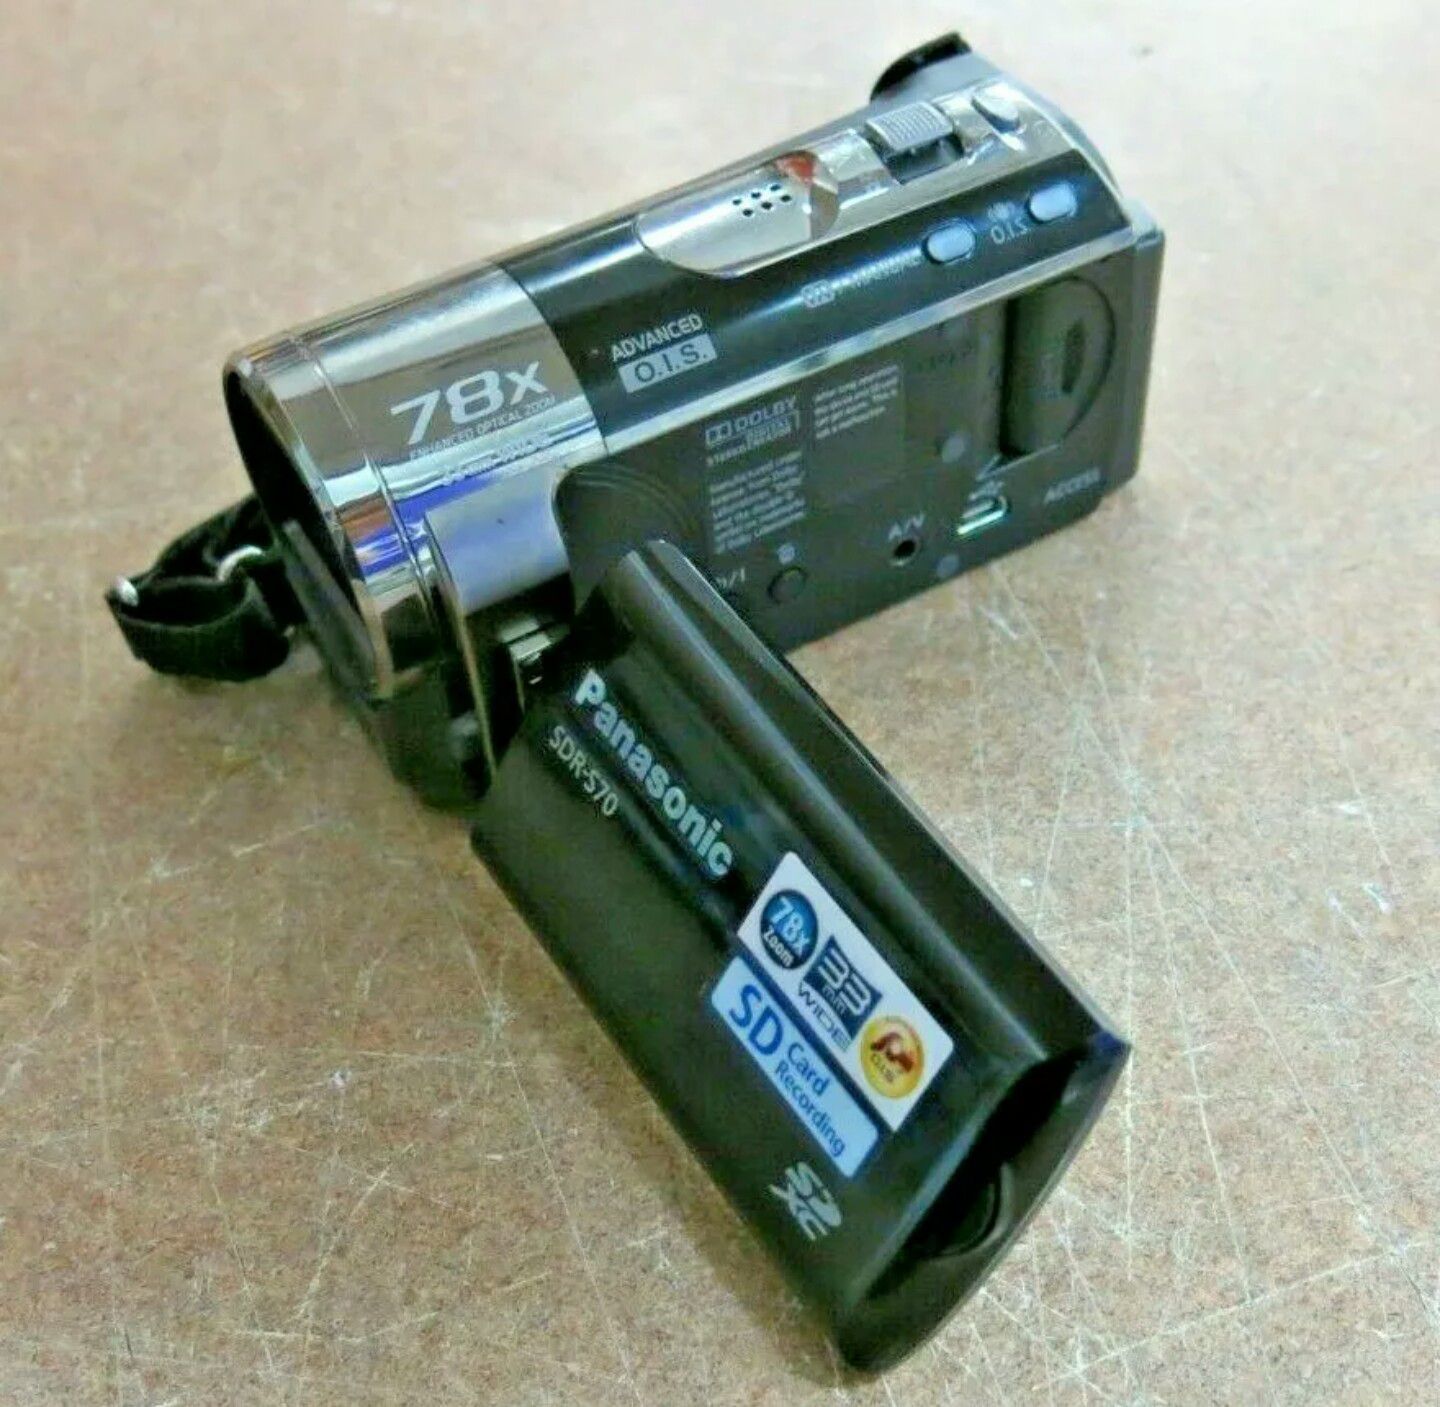 Panasonic digital camcorder with super great zoom